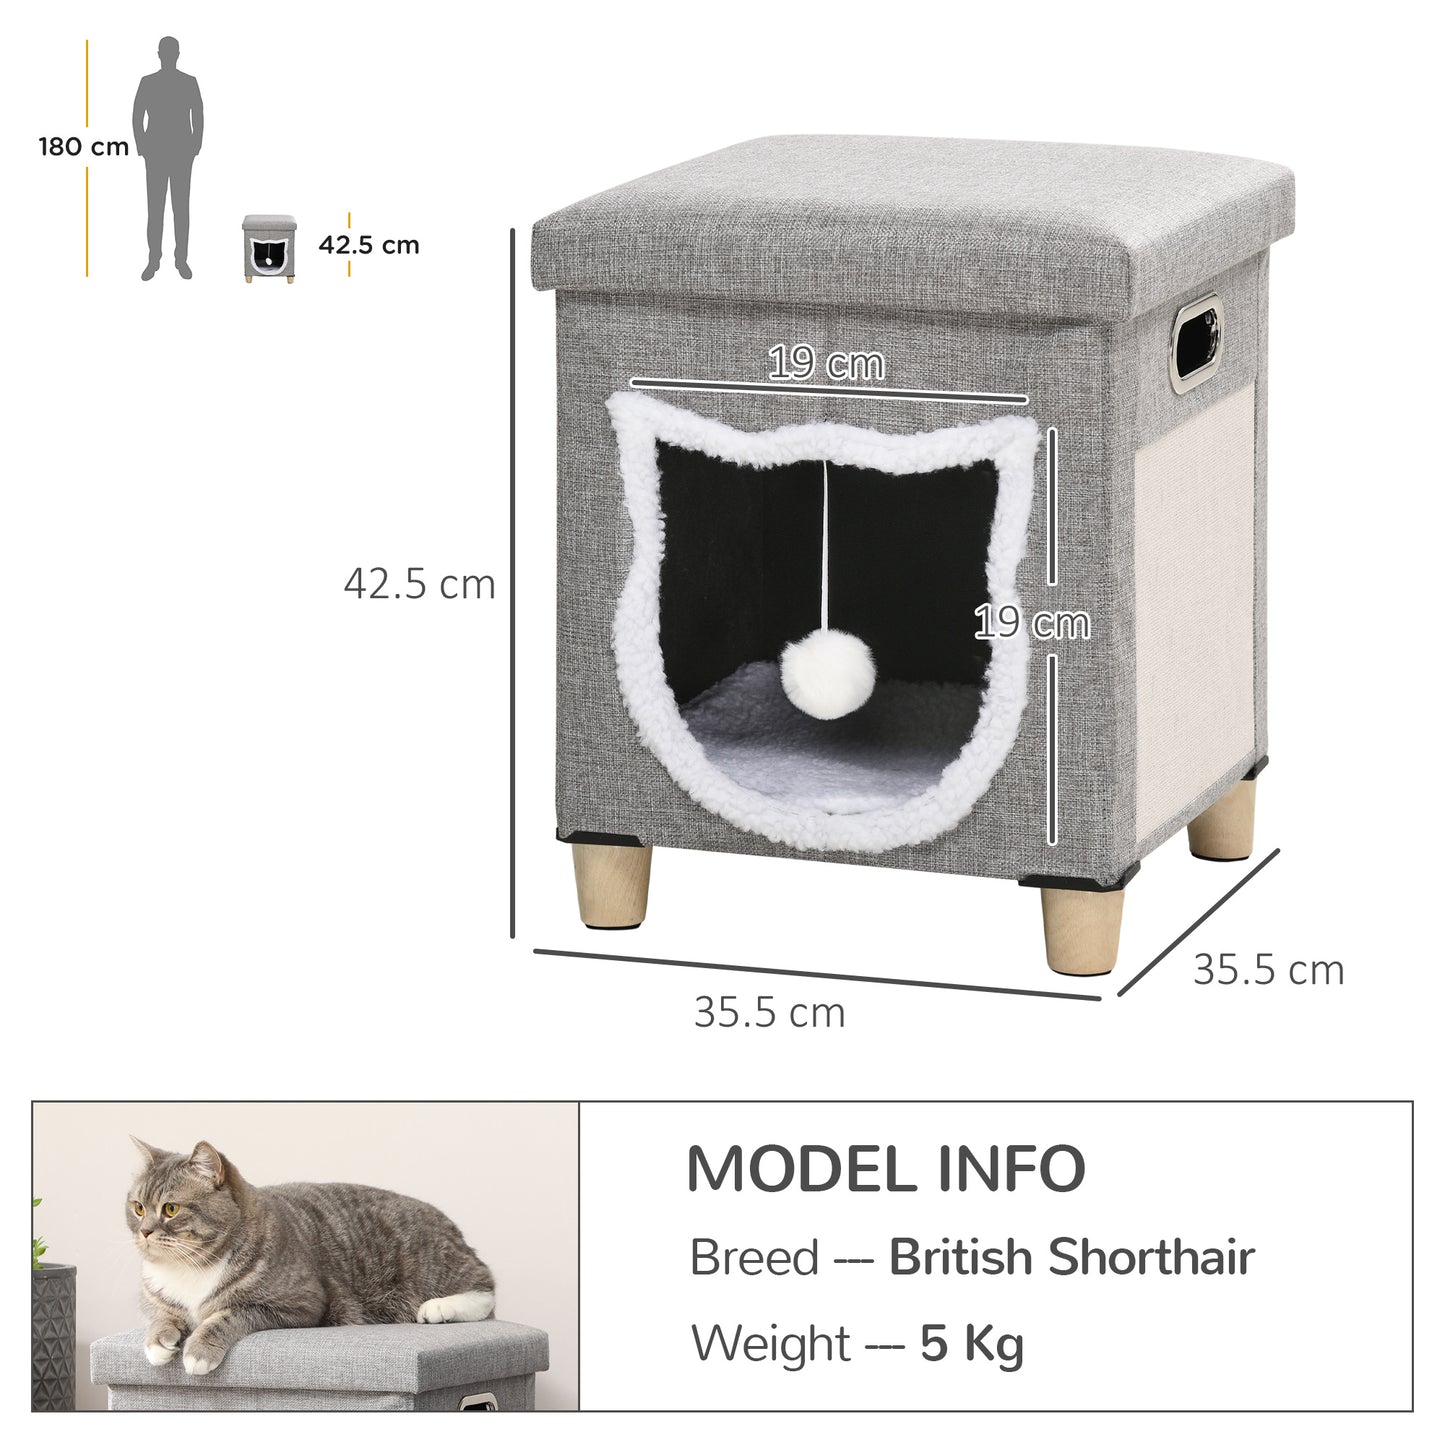 PawHut 2 in 1 Cat Bed Ottoman, Comfortable Cat Sleeping Cave House w/ Removable Cushion, Scratching Pad, Handles, Anti-Slip Foot Pad, Toy Ball, Entrance - Grey